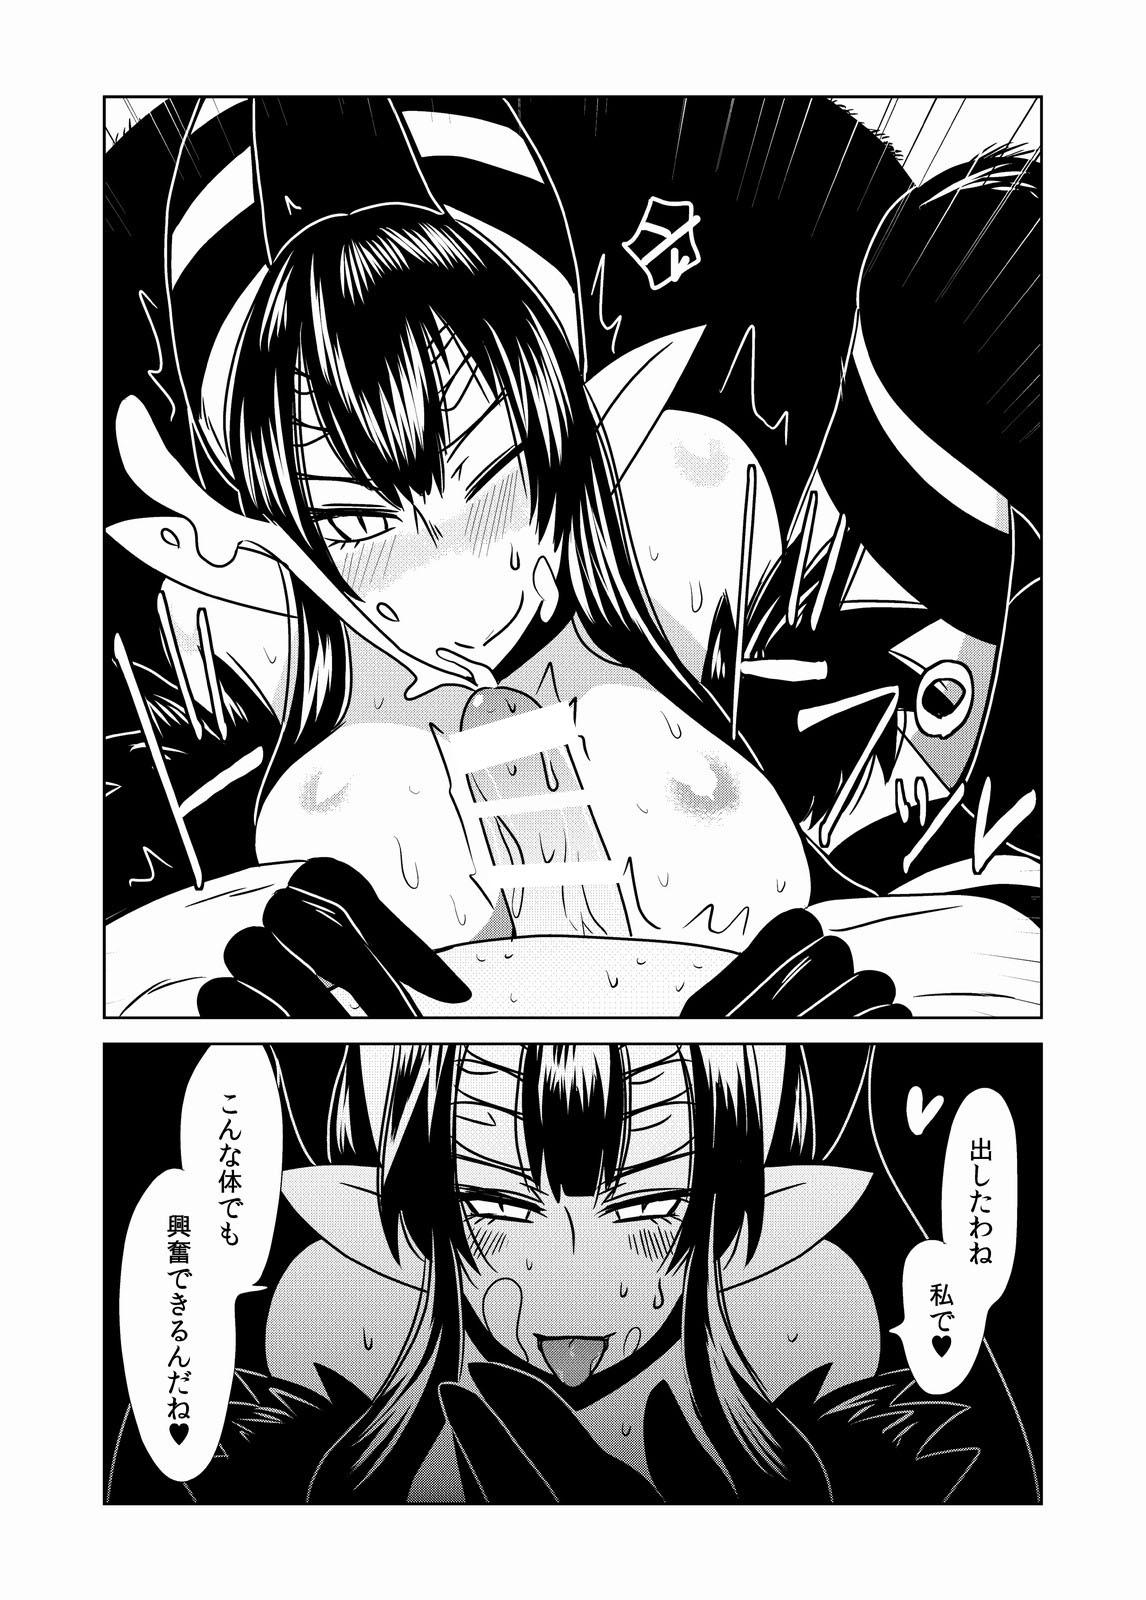 Chacal Go Go Kumo Musume. Tits - Page 11